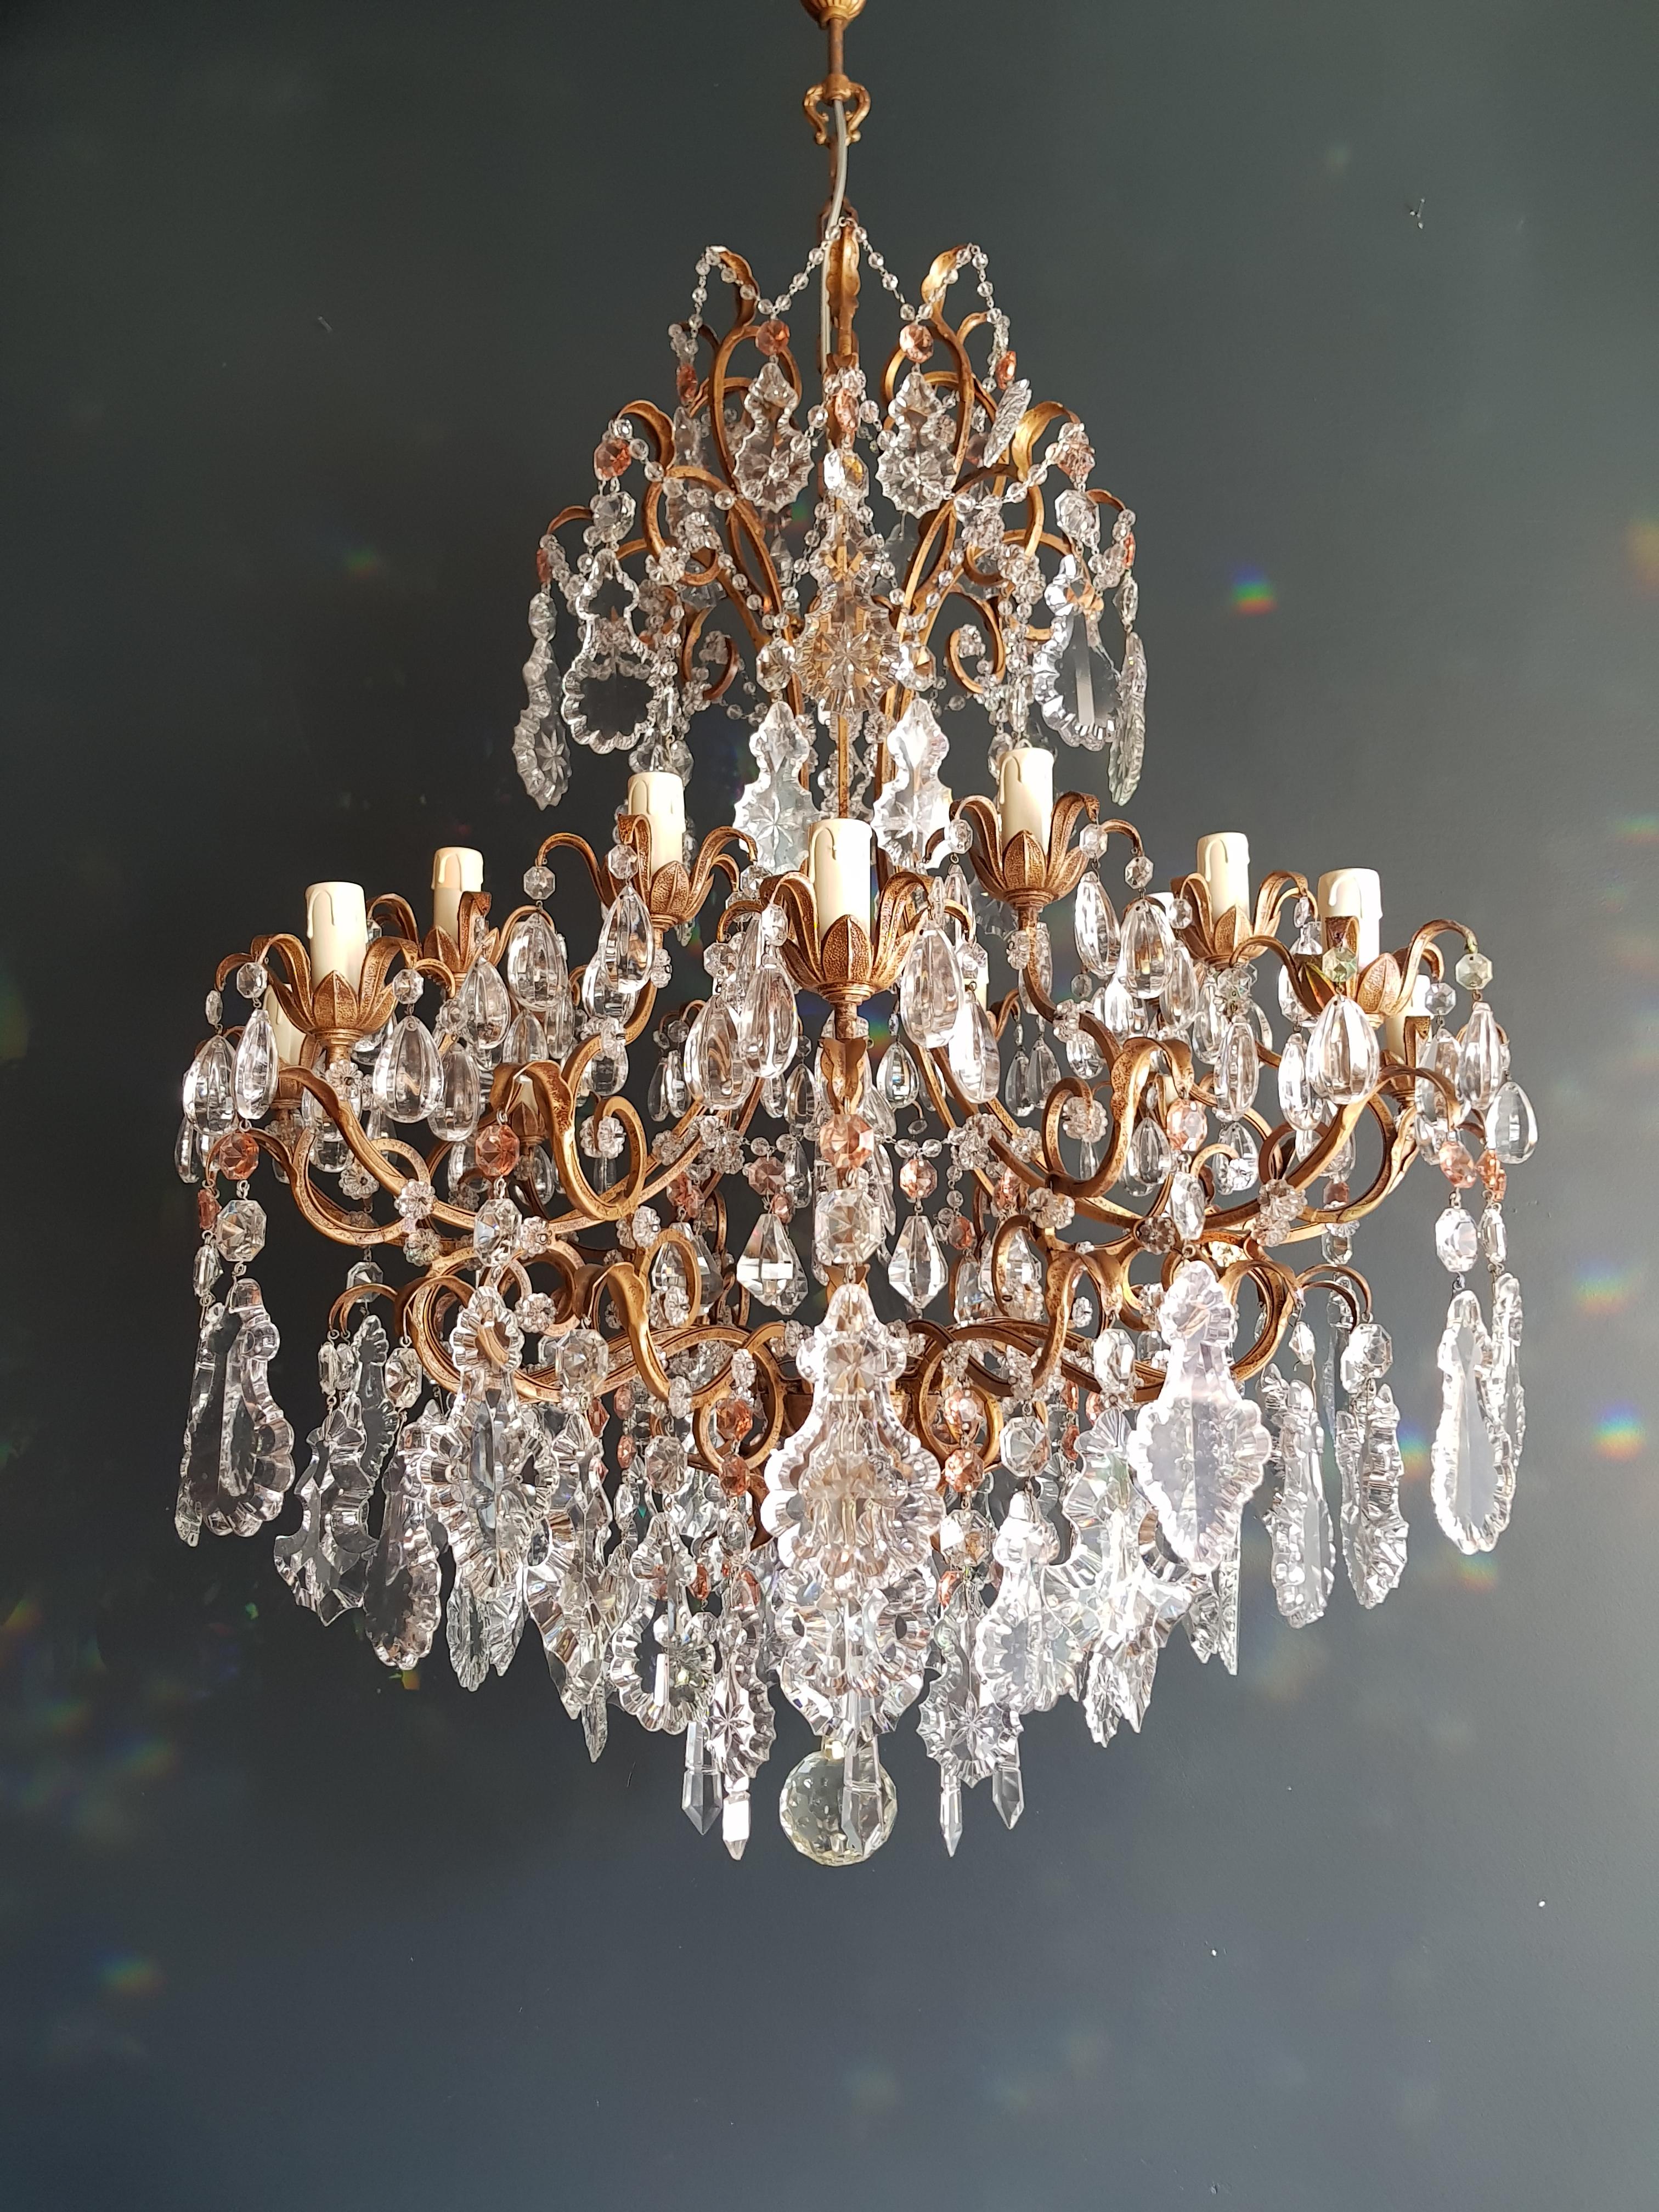 Beaded Crystal chandelier antique ceiling lamp Murano Florentiner Lustre Art Nouveau.

Measures: Total height 130 cm, height without chain 100 cm, diameter 90 cm. Weight (approximately): 32kg.

Number of lights: Six-teen bulb sockets: 16 x E14